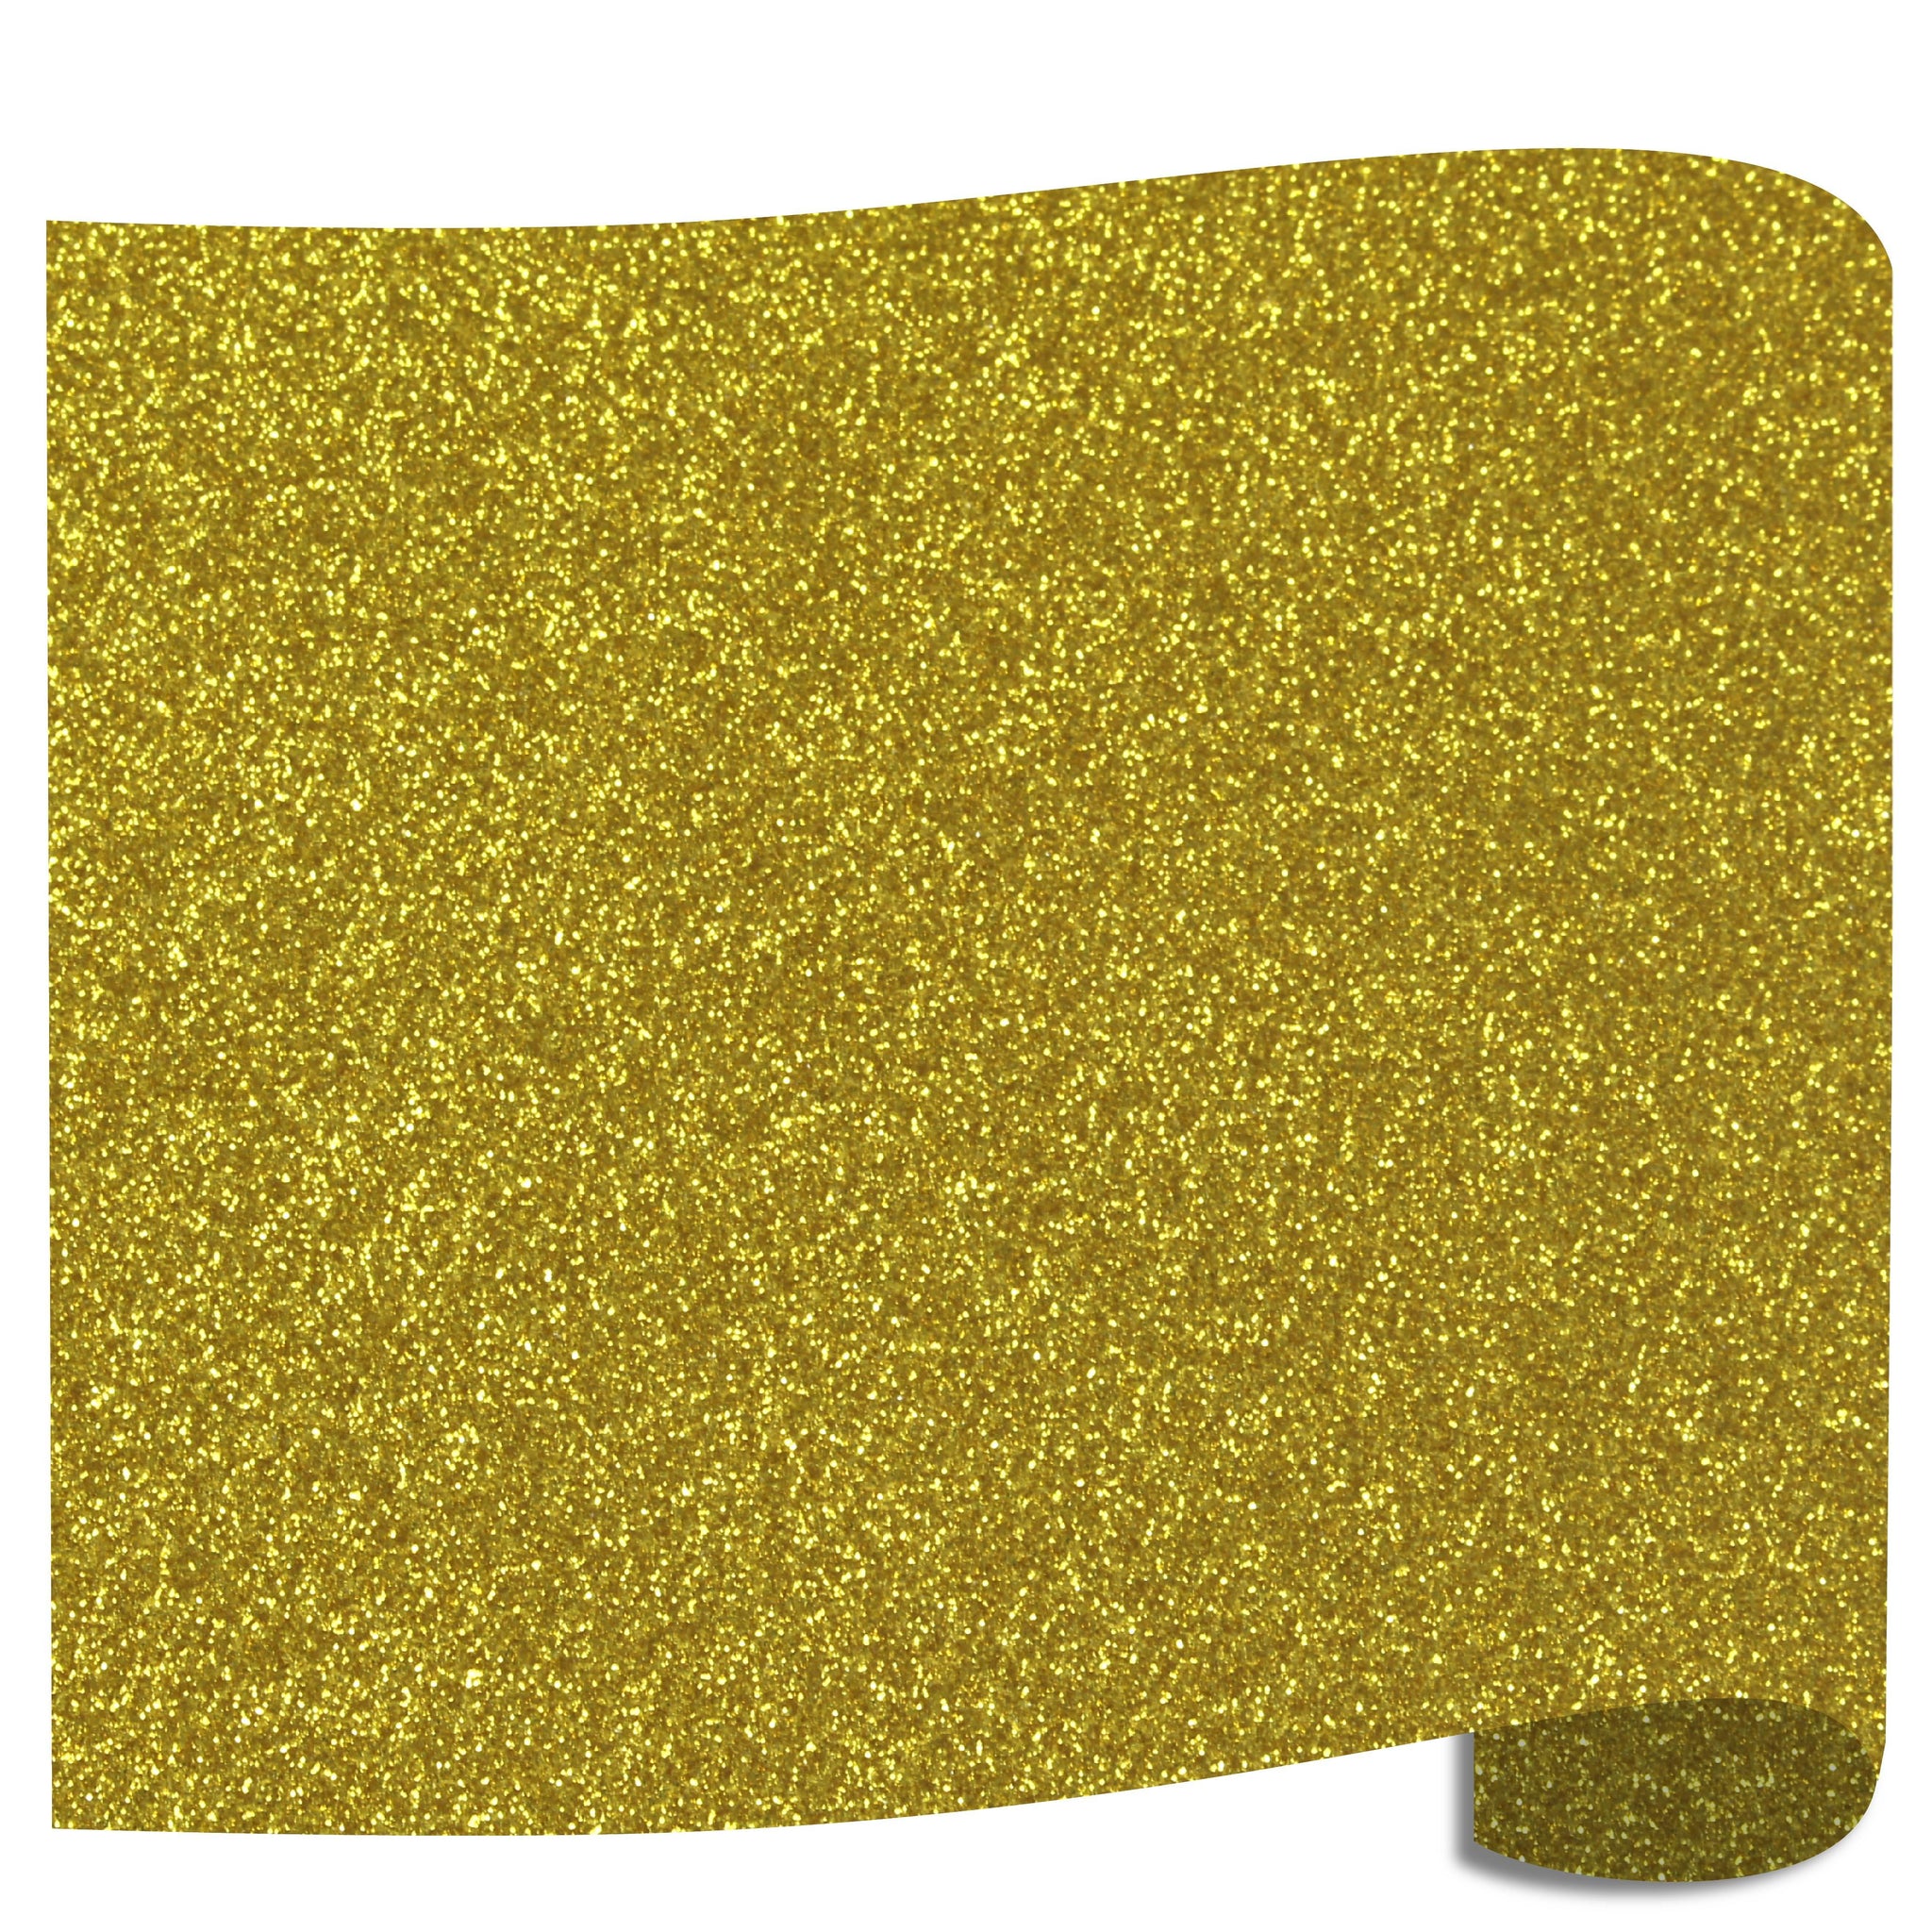 Yellow-gold and white Ombre print craft vinyl sheet - HTV - Adhesive V